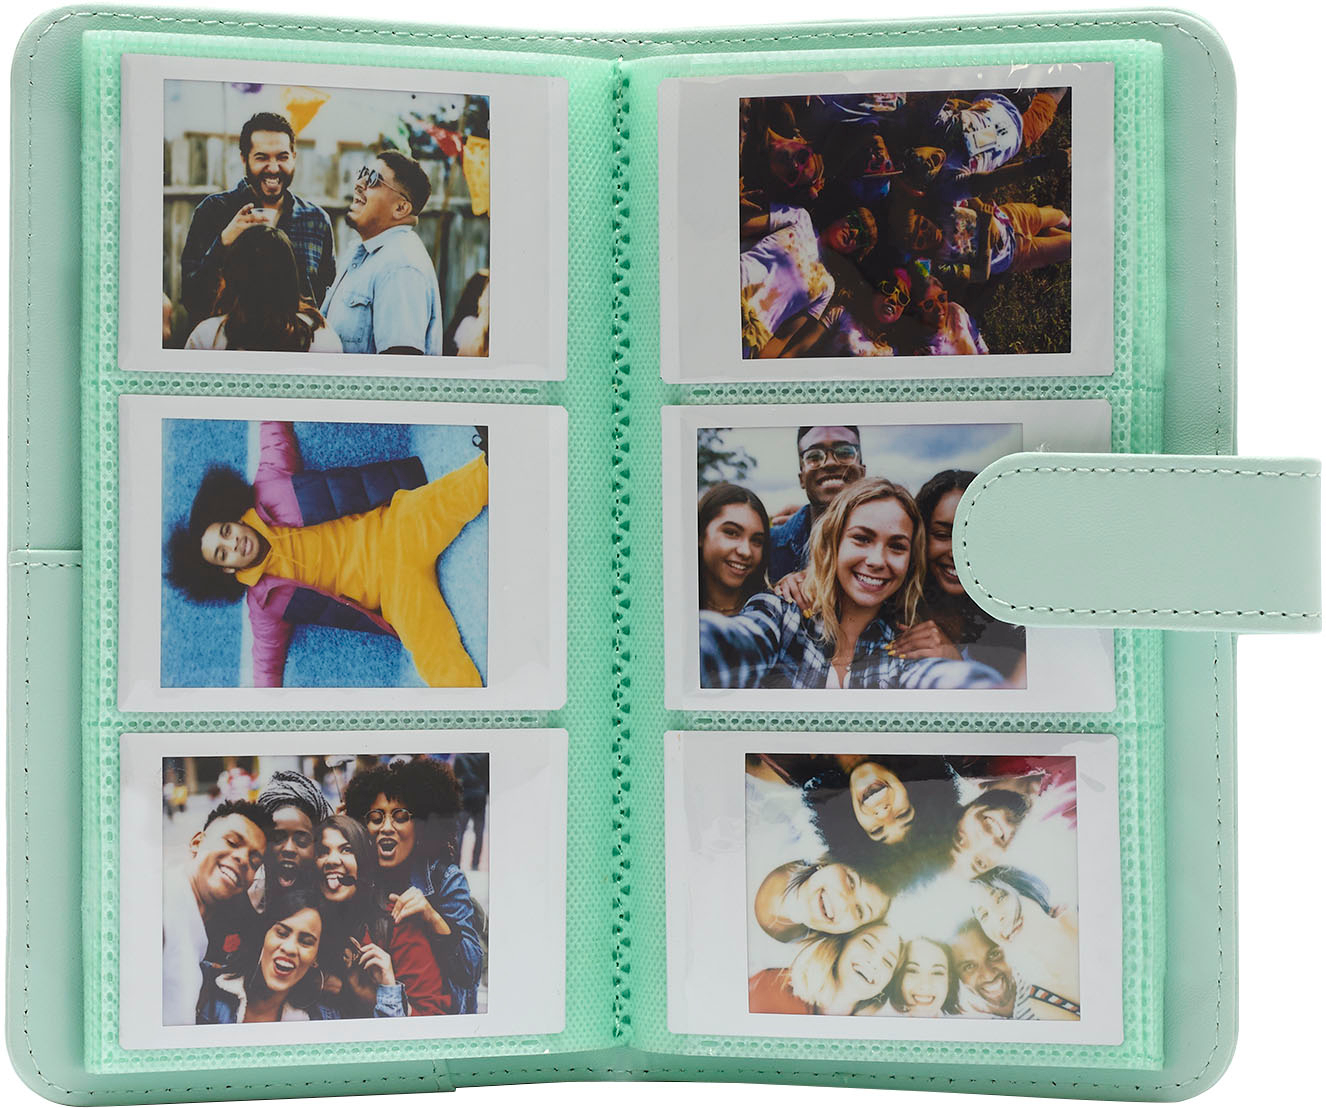 Shop Instax Film Photo Album with great discounts and prices